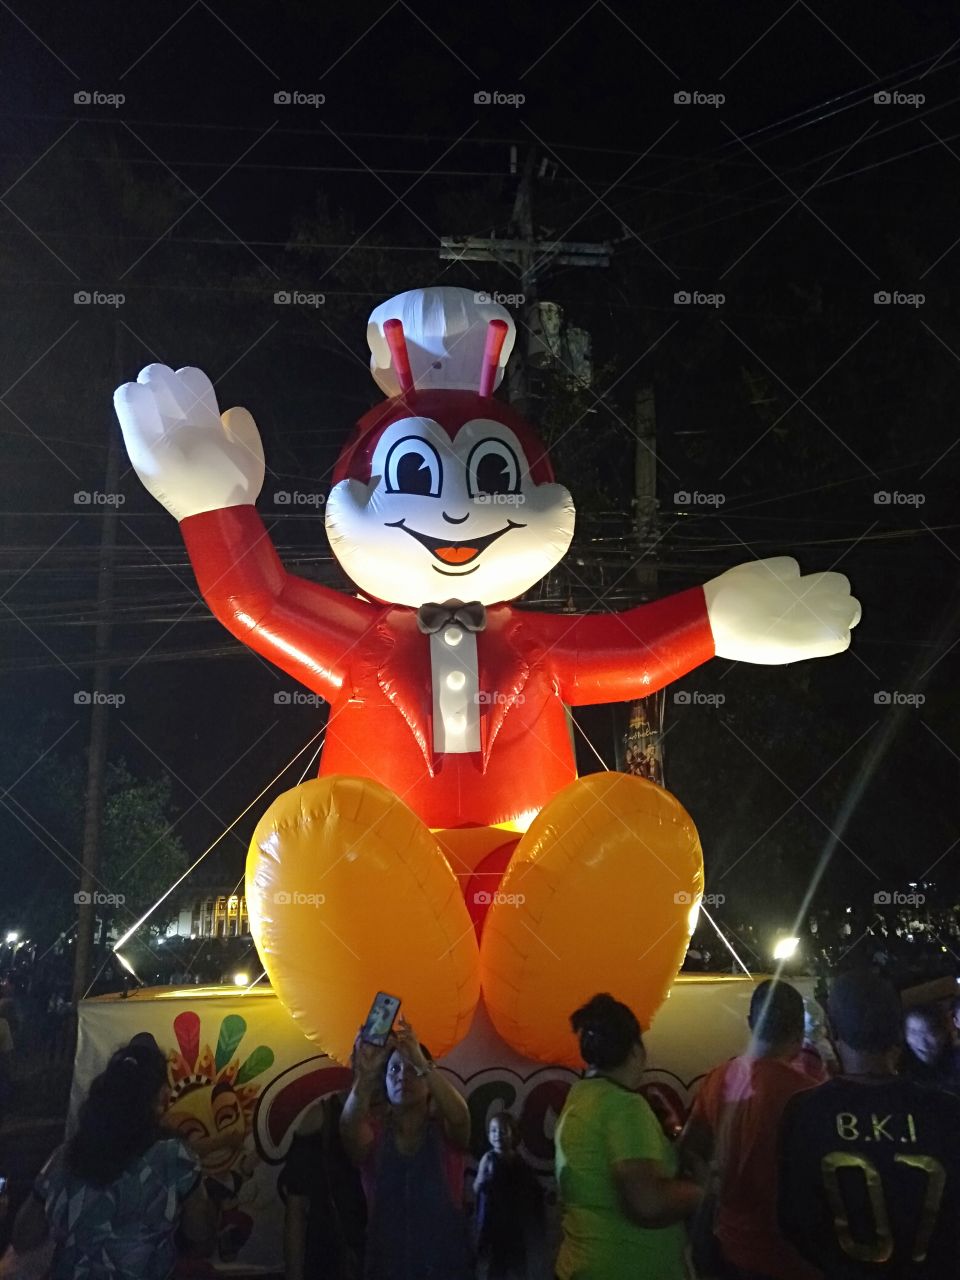 Jollibee is happy while he is setting on his chair☺️ he need to be relaxed 🤗